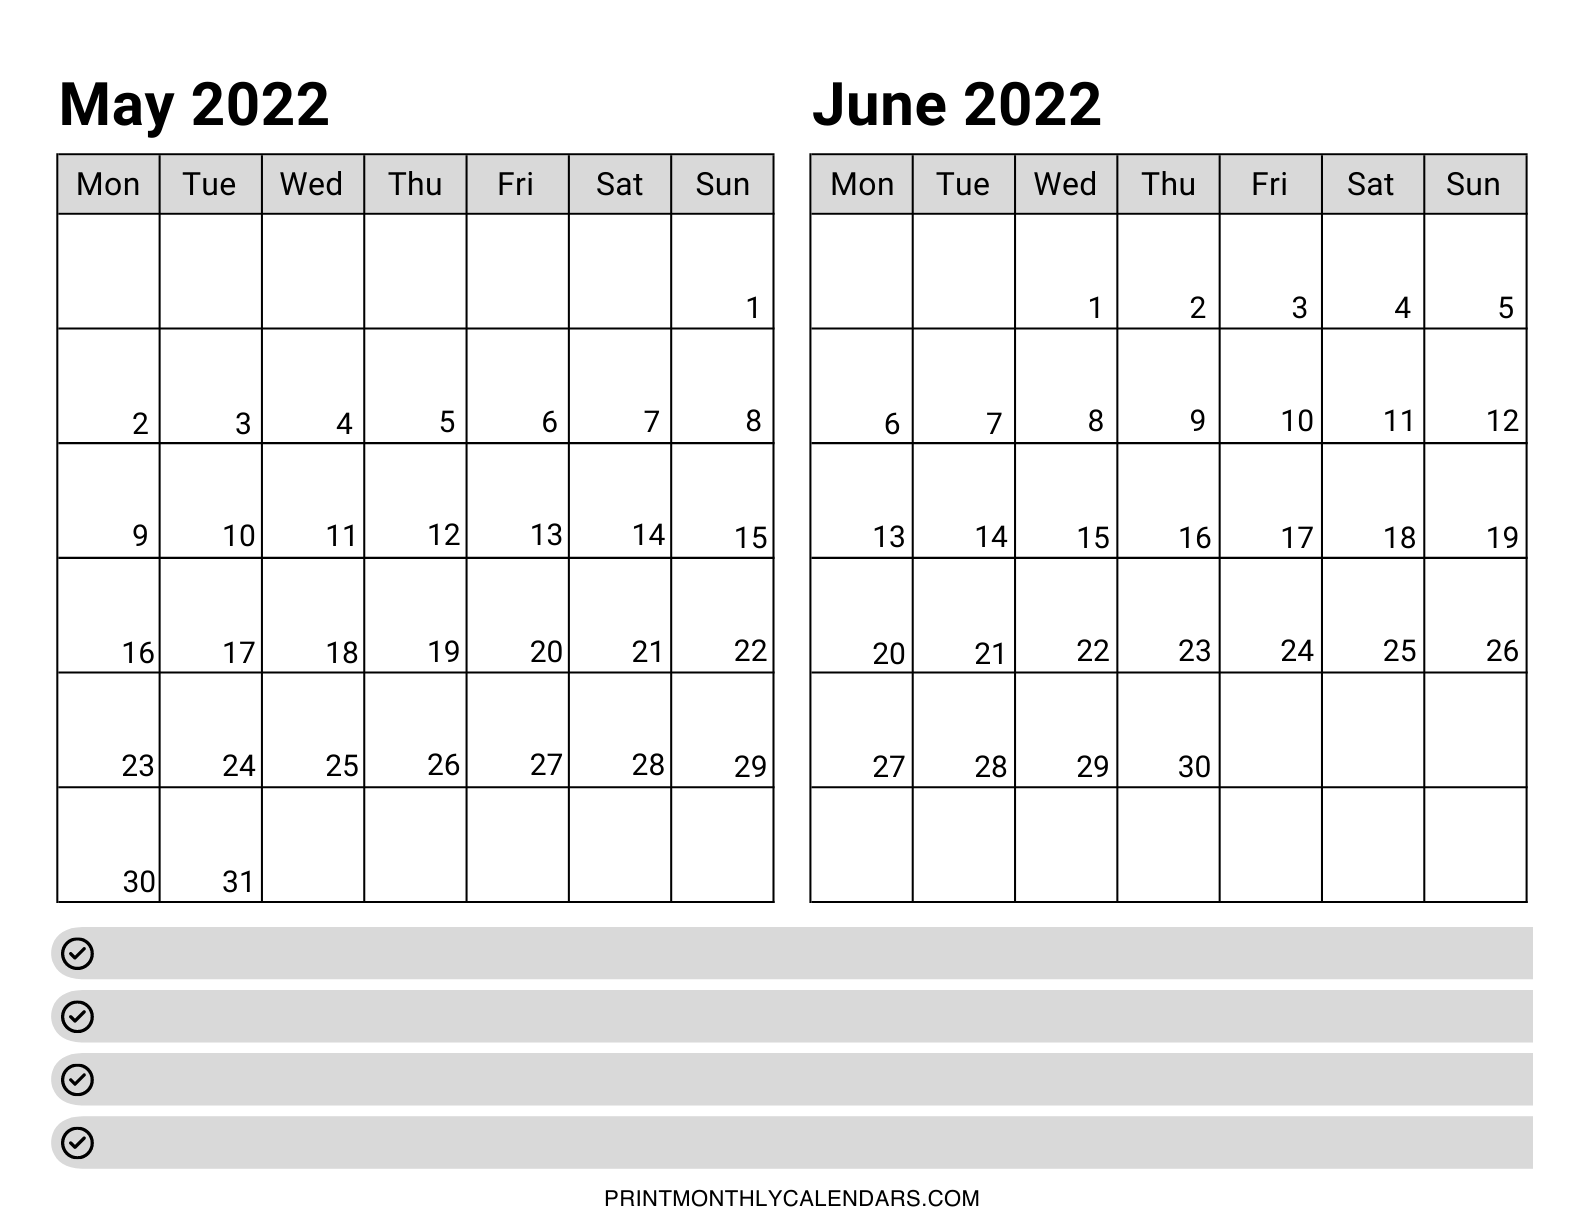 Monday start May June 2022 calendar template with a blank notes section at the bottom to write important days, dates, monthly events, schedules, goals, and appointments.